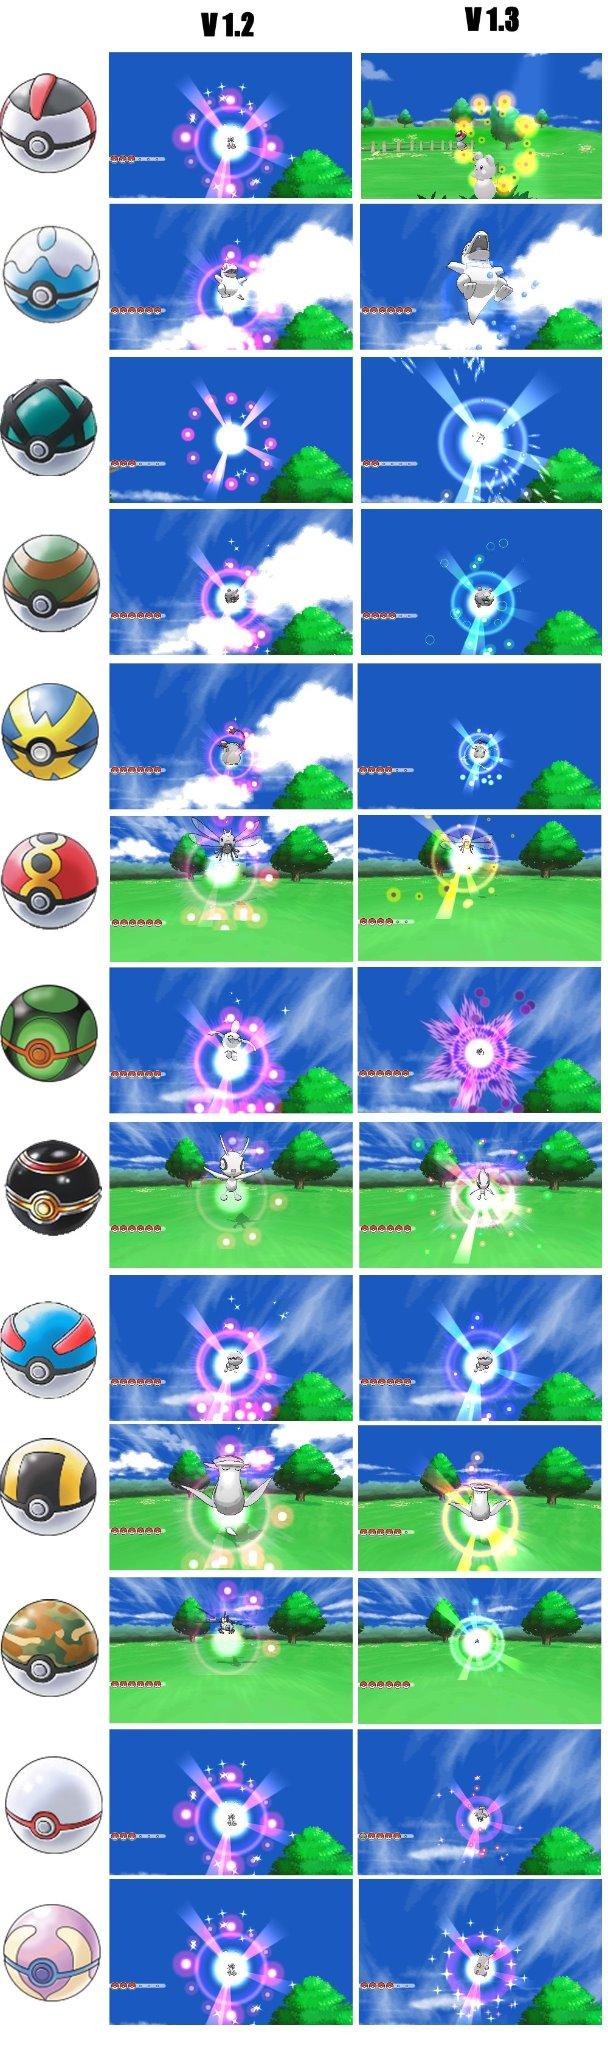 Joe Merrick A Twitter Updated With Heal Ball And Premier Ball Premier Ball Is Similar To Pokeball But Seems To Have Smaller Energy Orbs Http T Co P1xlh7ho9e